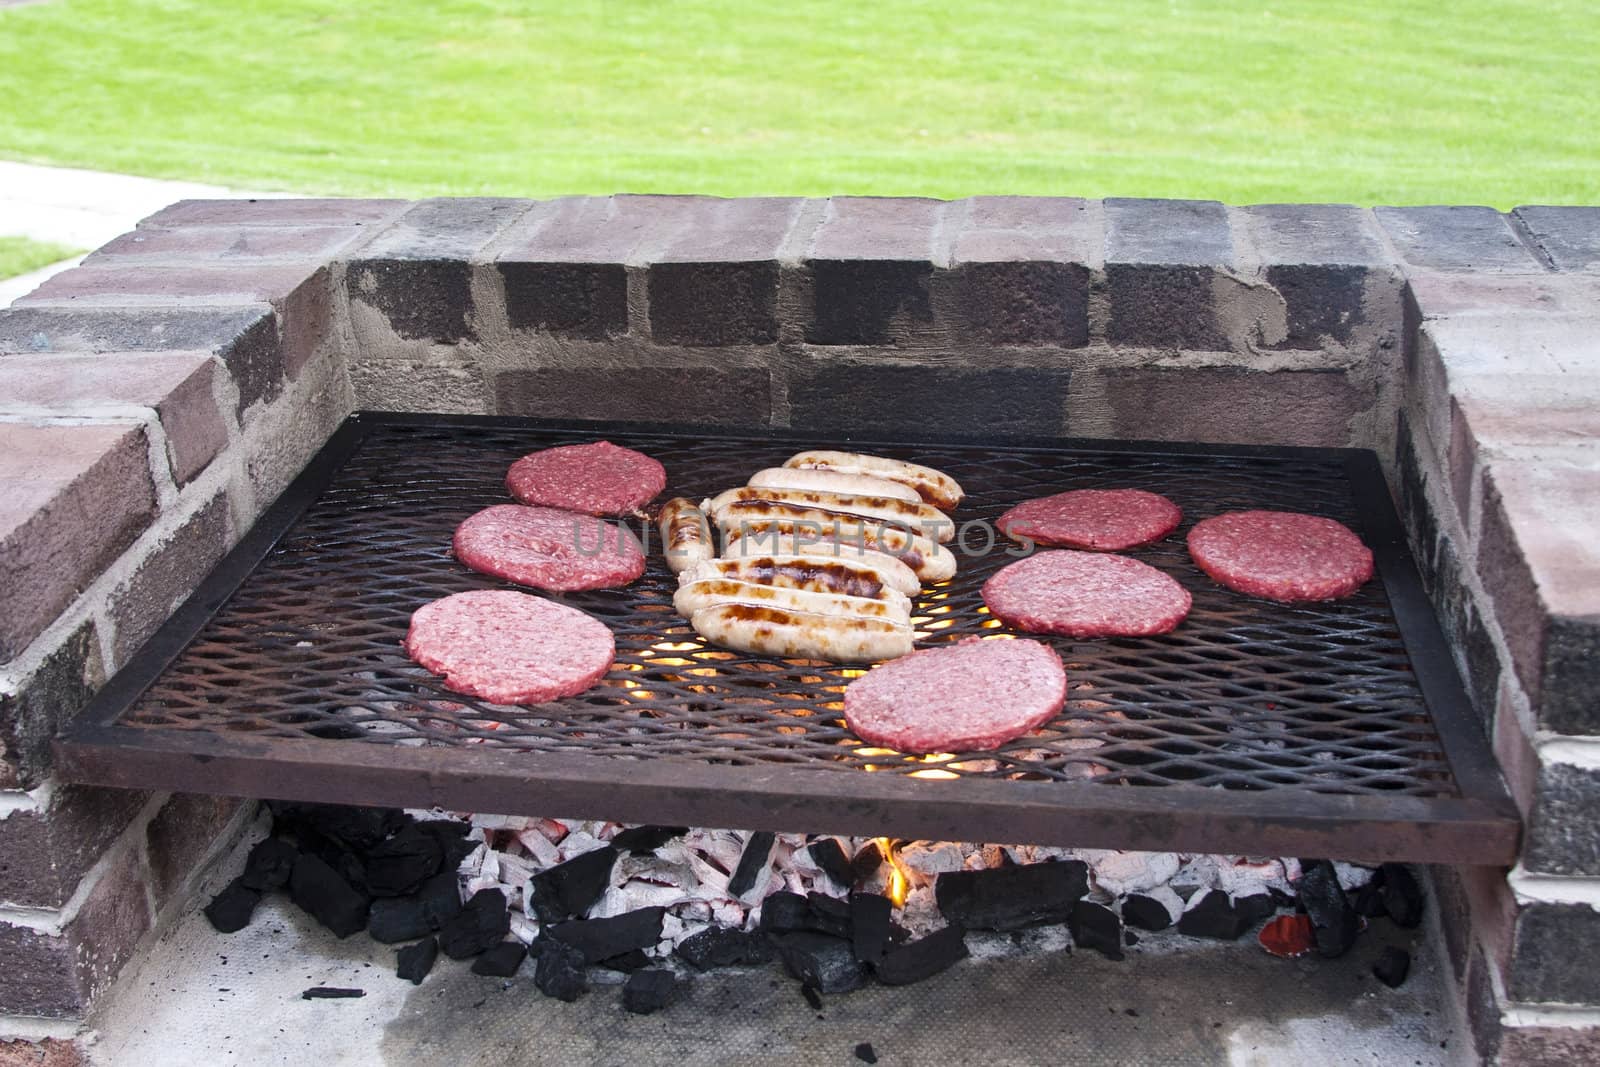 Burgers and sausages cooking on a brick barbeque